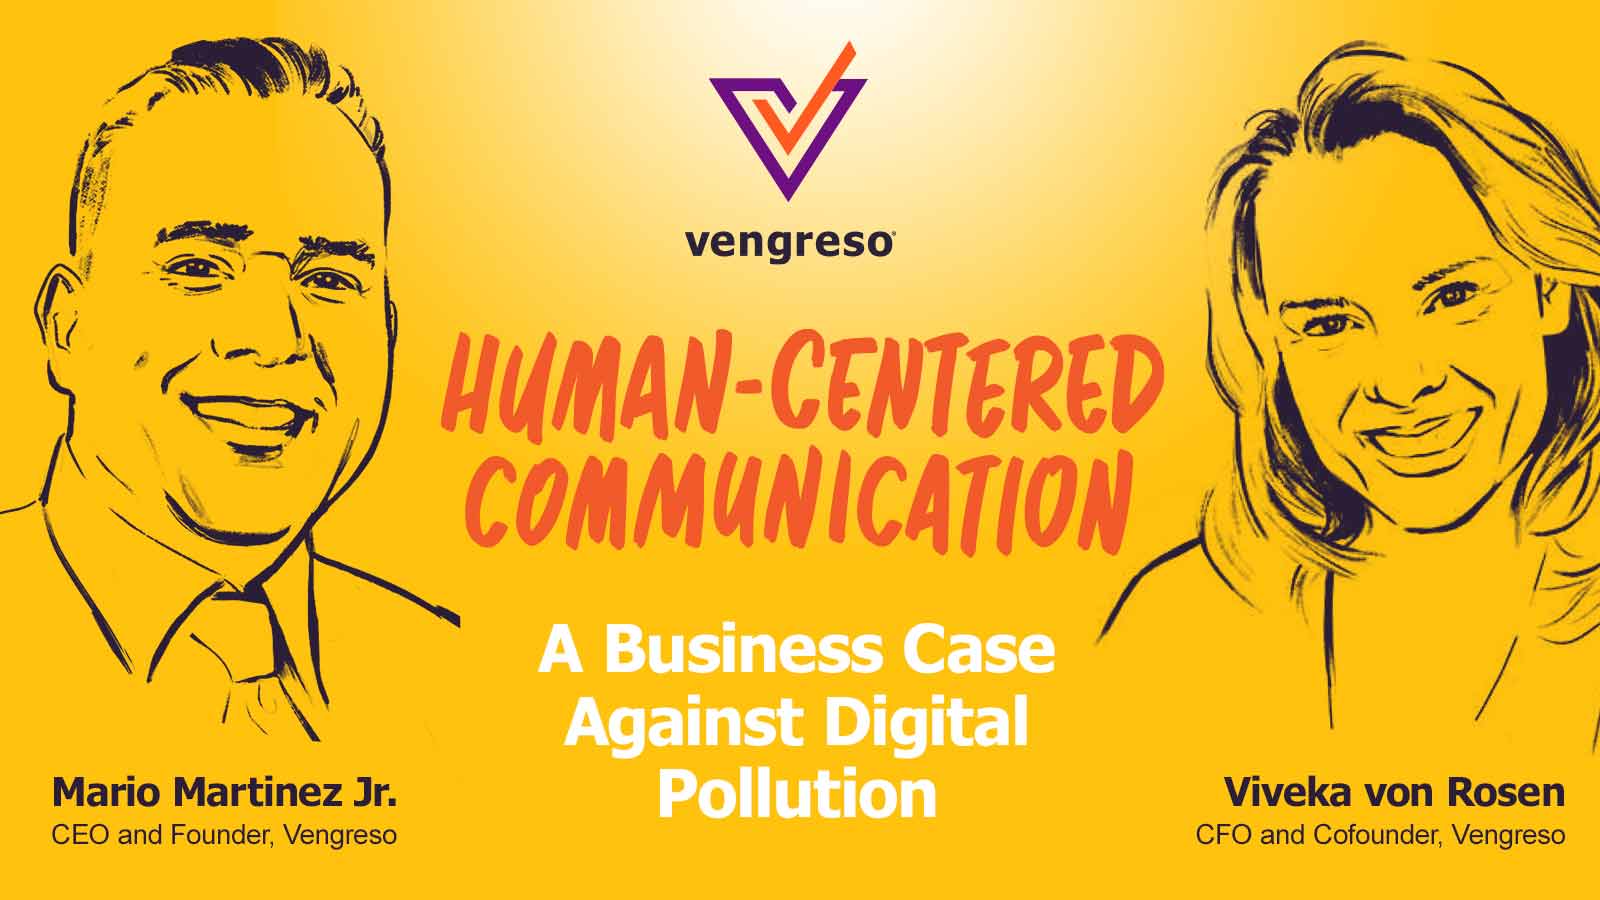 Human-Centered Communication: A Business Case Against Digital Pollution